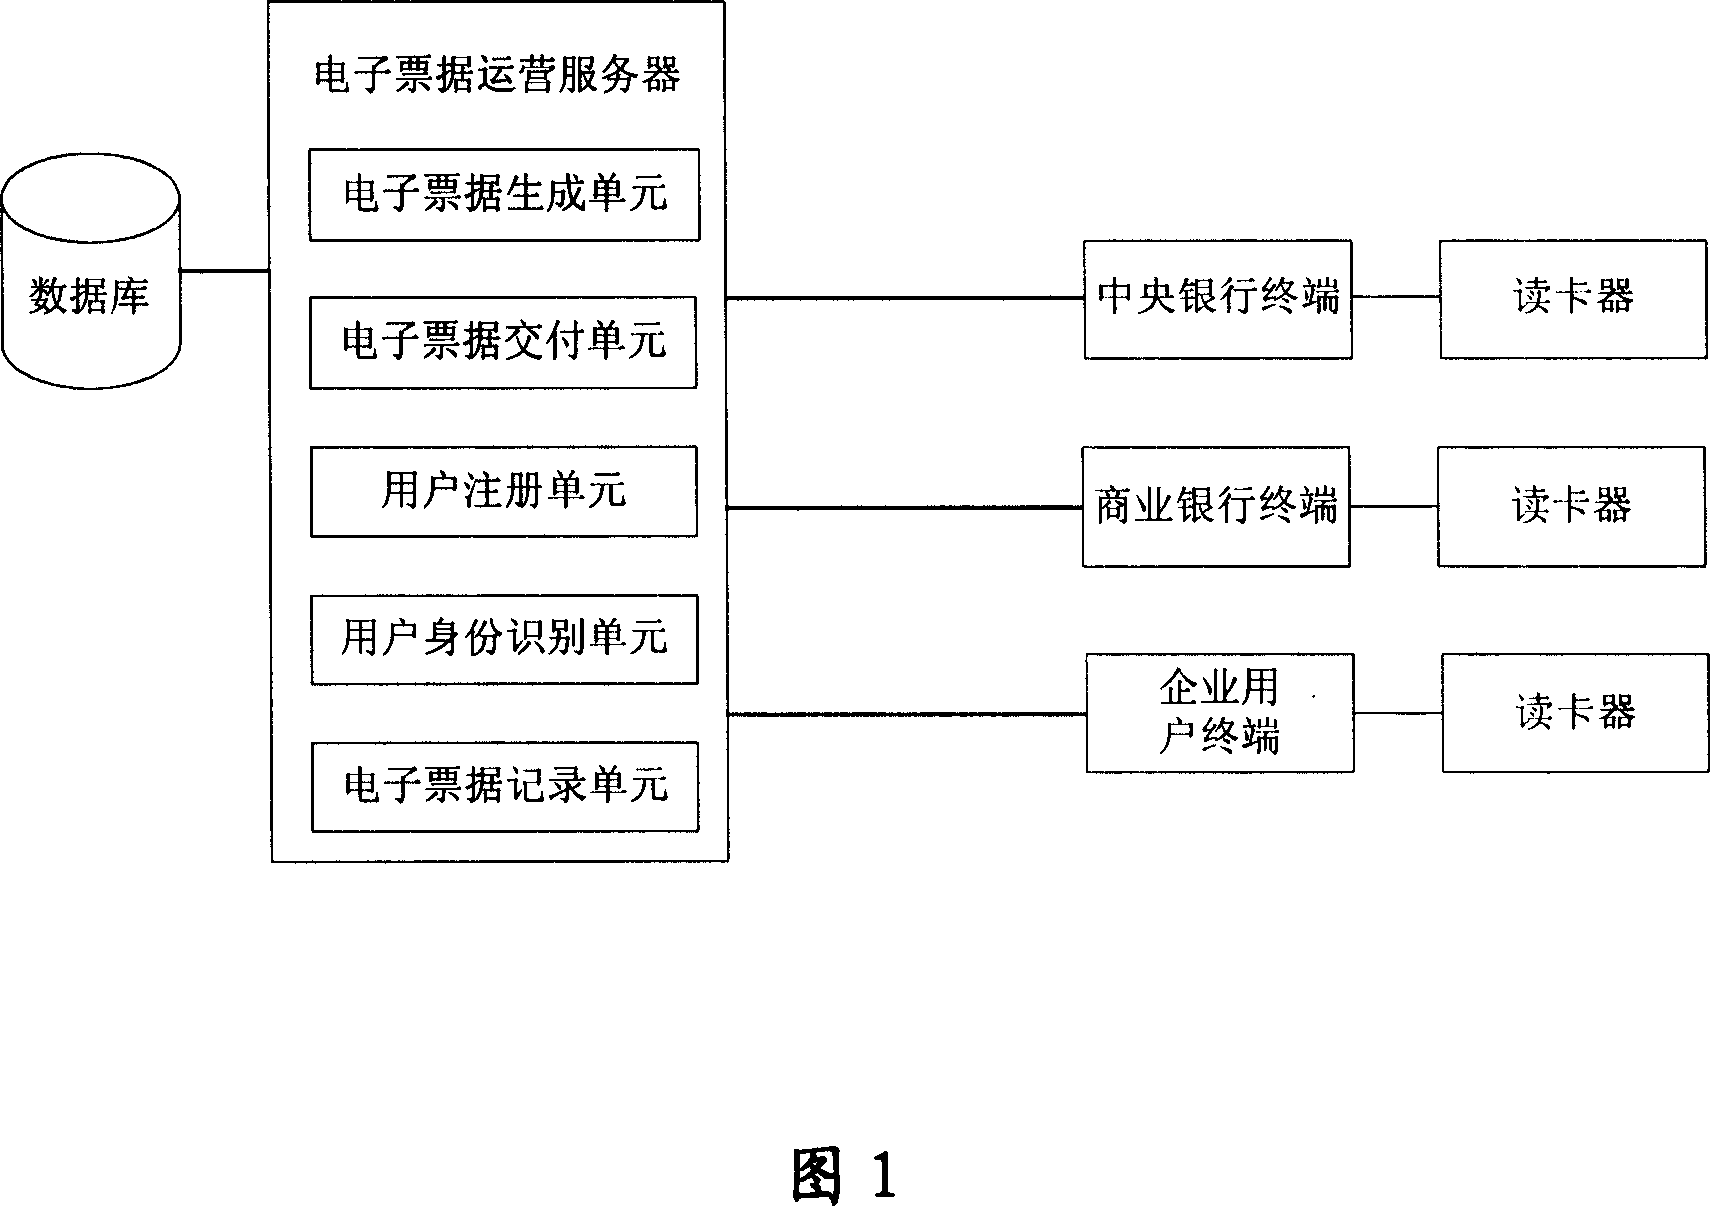 Electric tickets method and system based on network